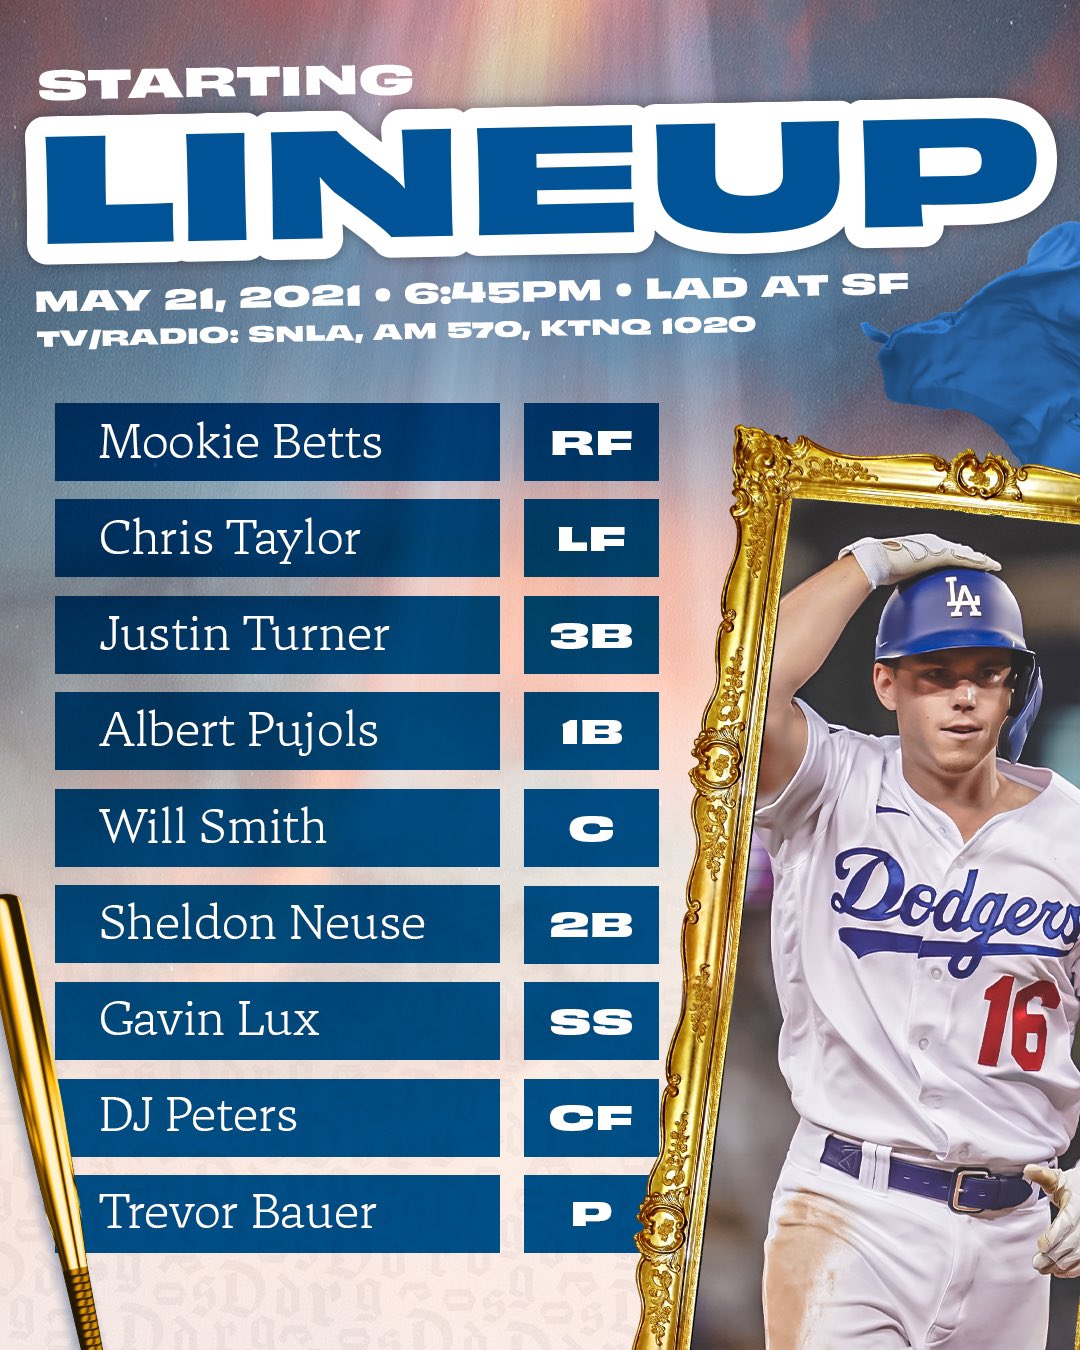 Los Angeles Dodgers on Twitter "Tonight’s Dodgers lineup at Giants